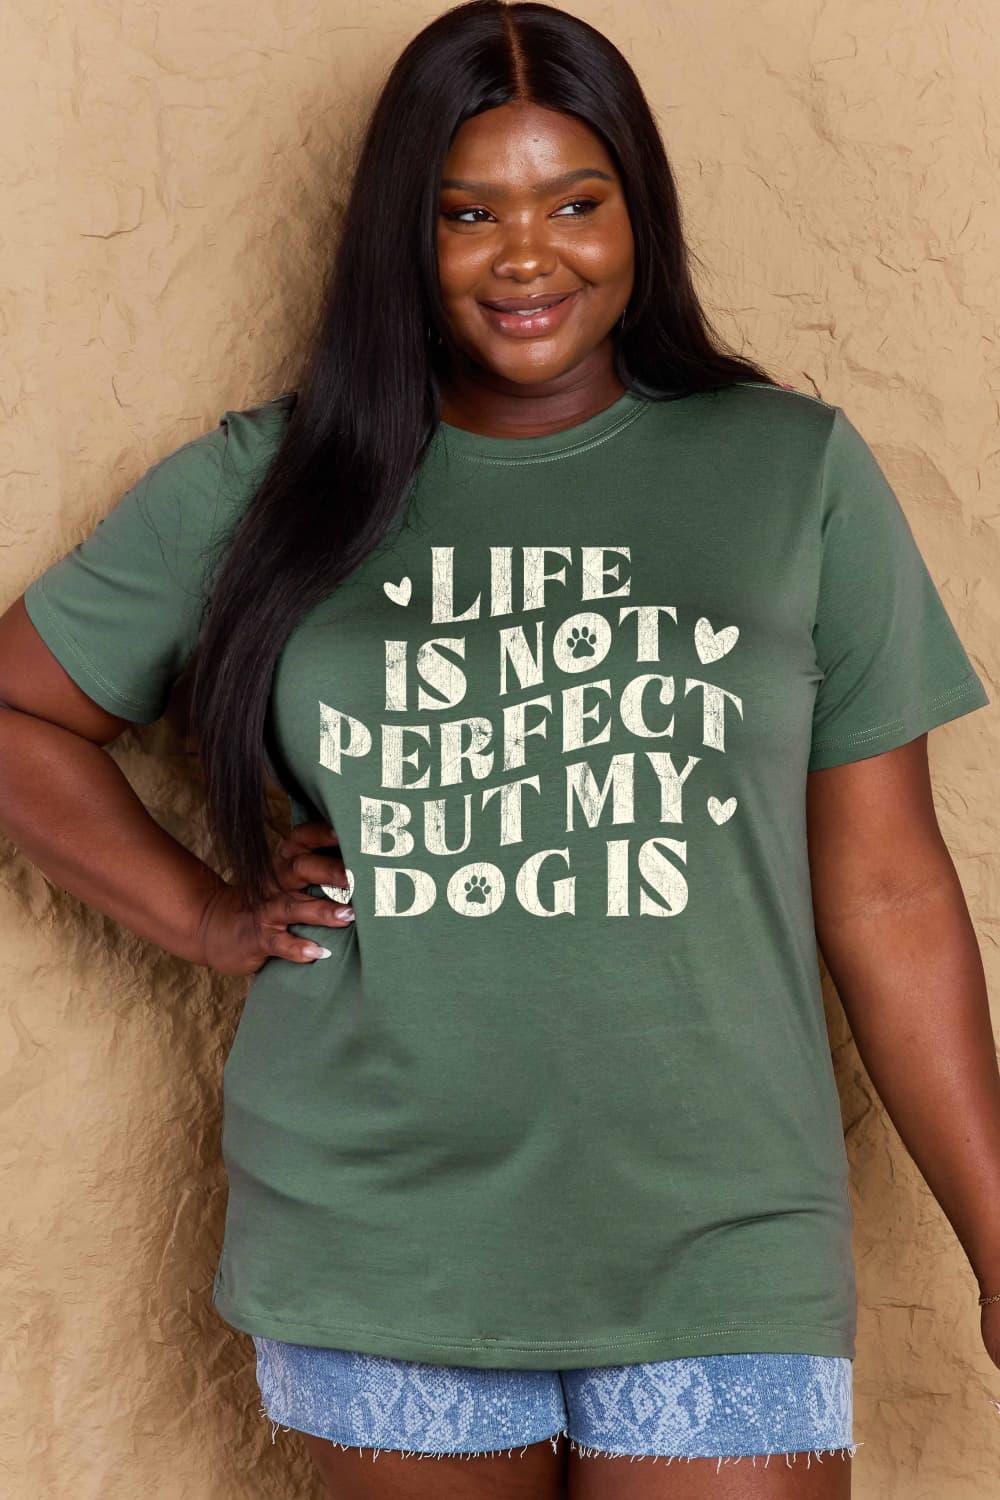 Simply Love Full Size Dog Slogan Graphic Cotton T-Shirt - Crazy Like a Daisy Boutique #